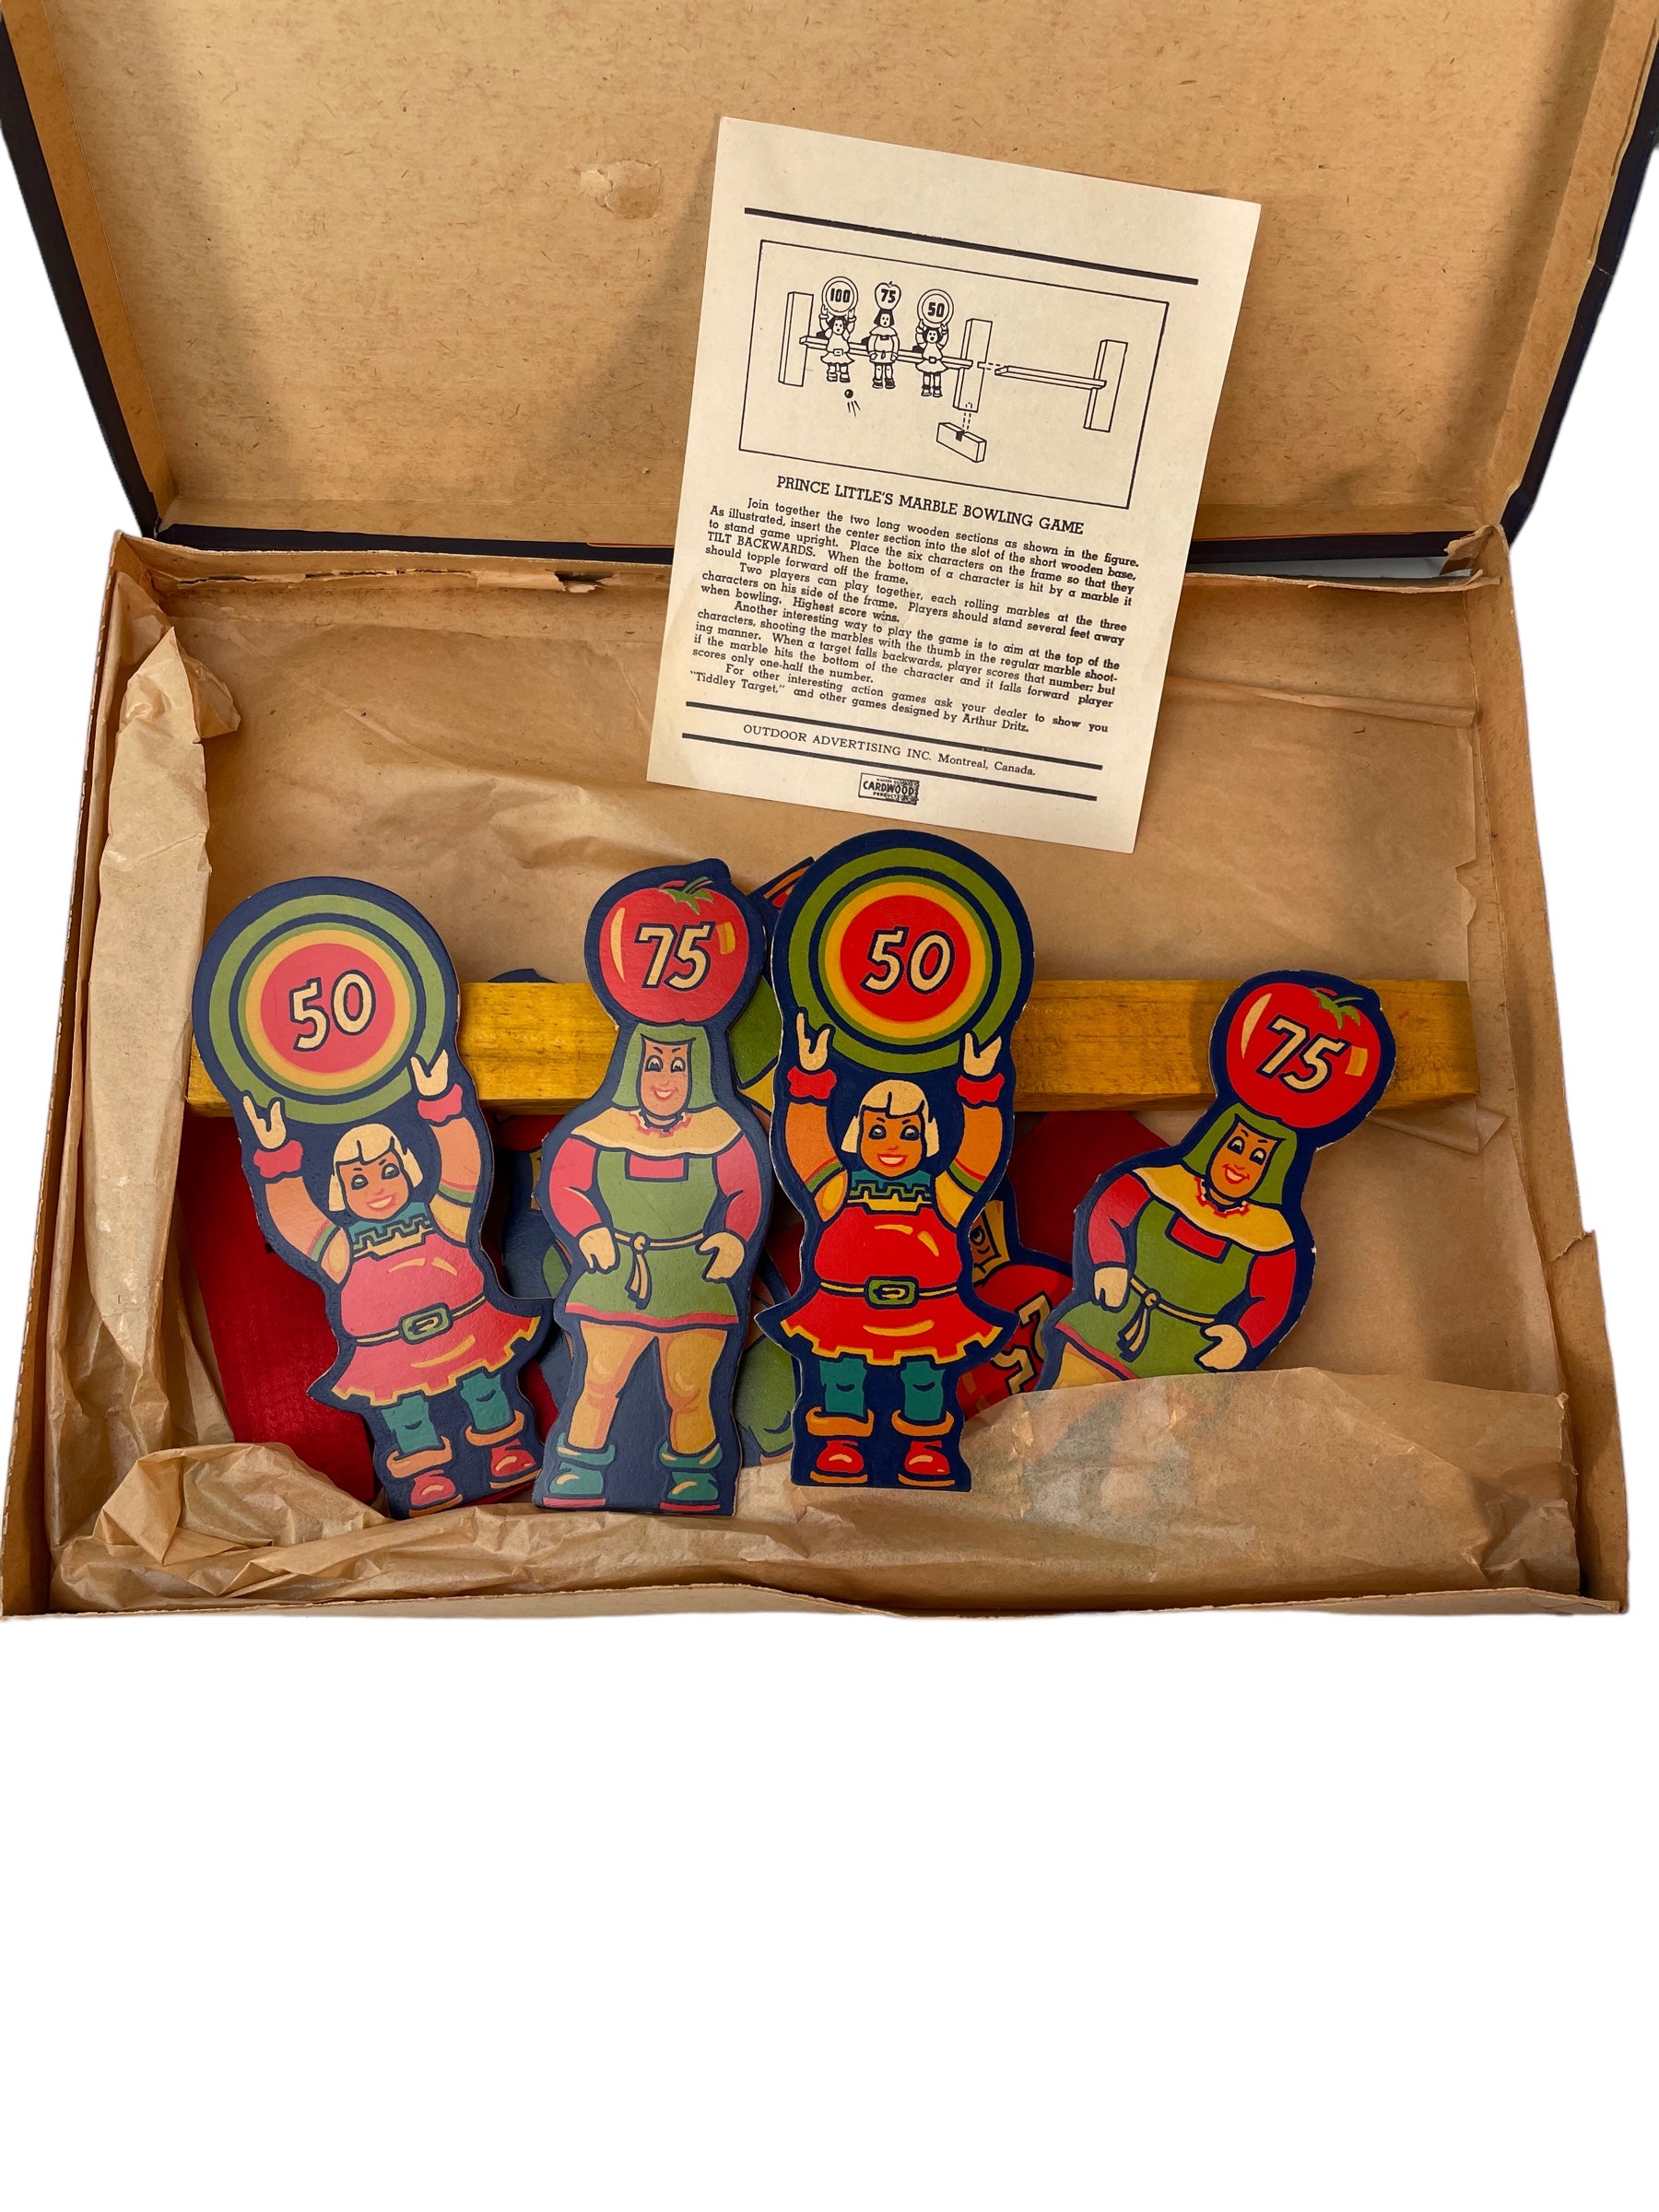 Prince Little's Bowling and Marble Set by Vitaplay Toy Co - 1950